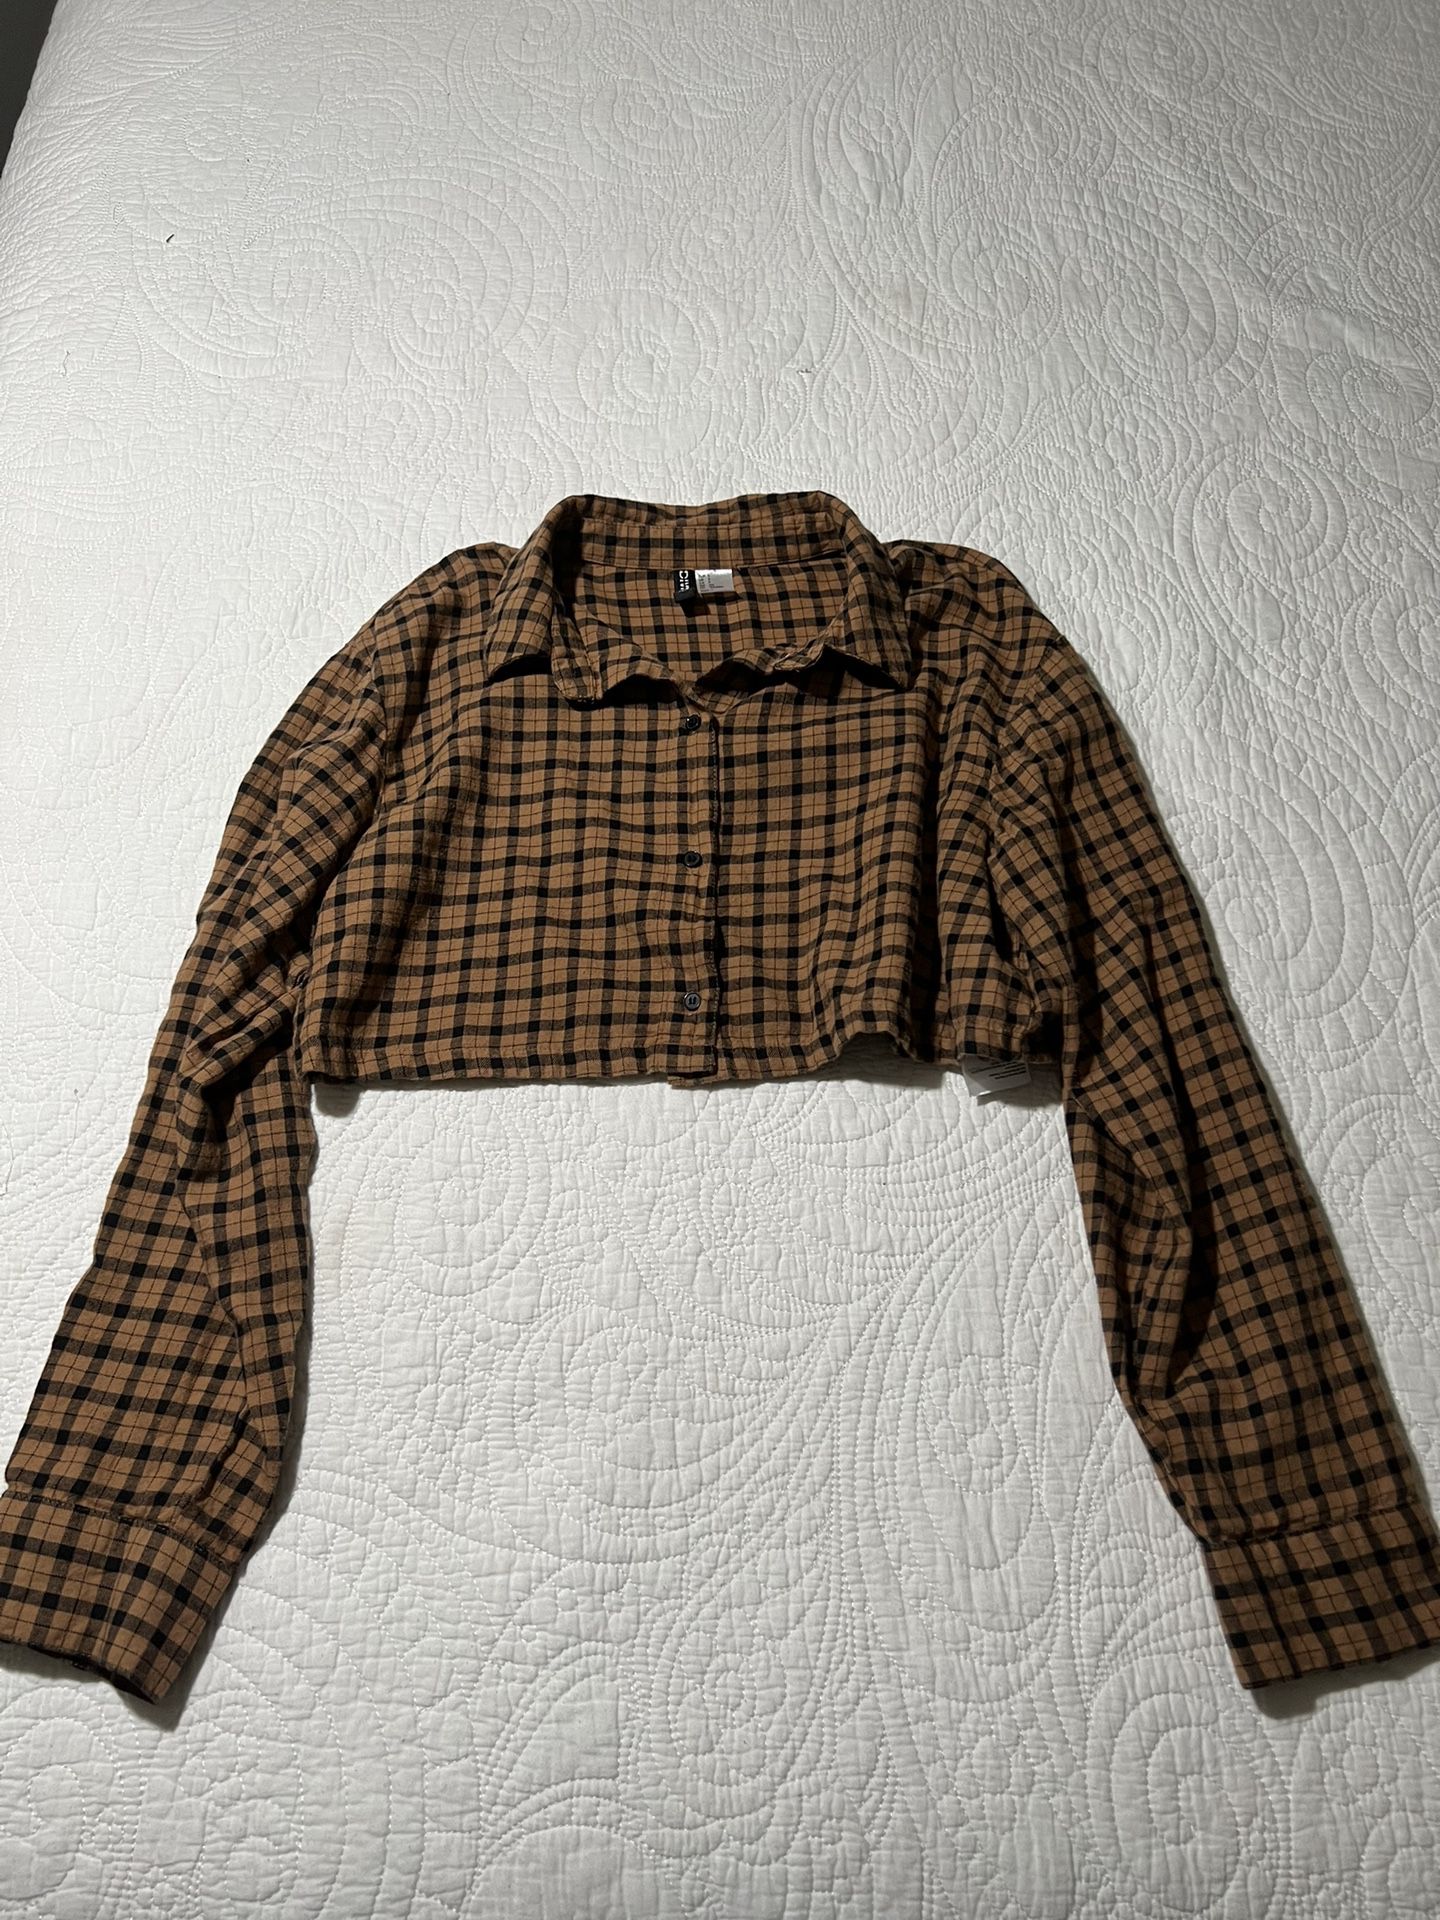 Lot Of 3 Long Sleeve Cropped Tops Size Small.